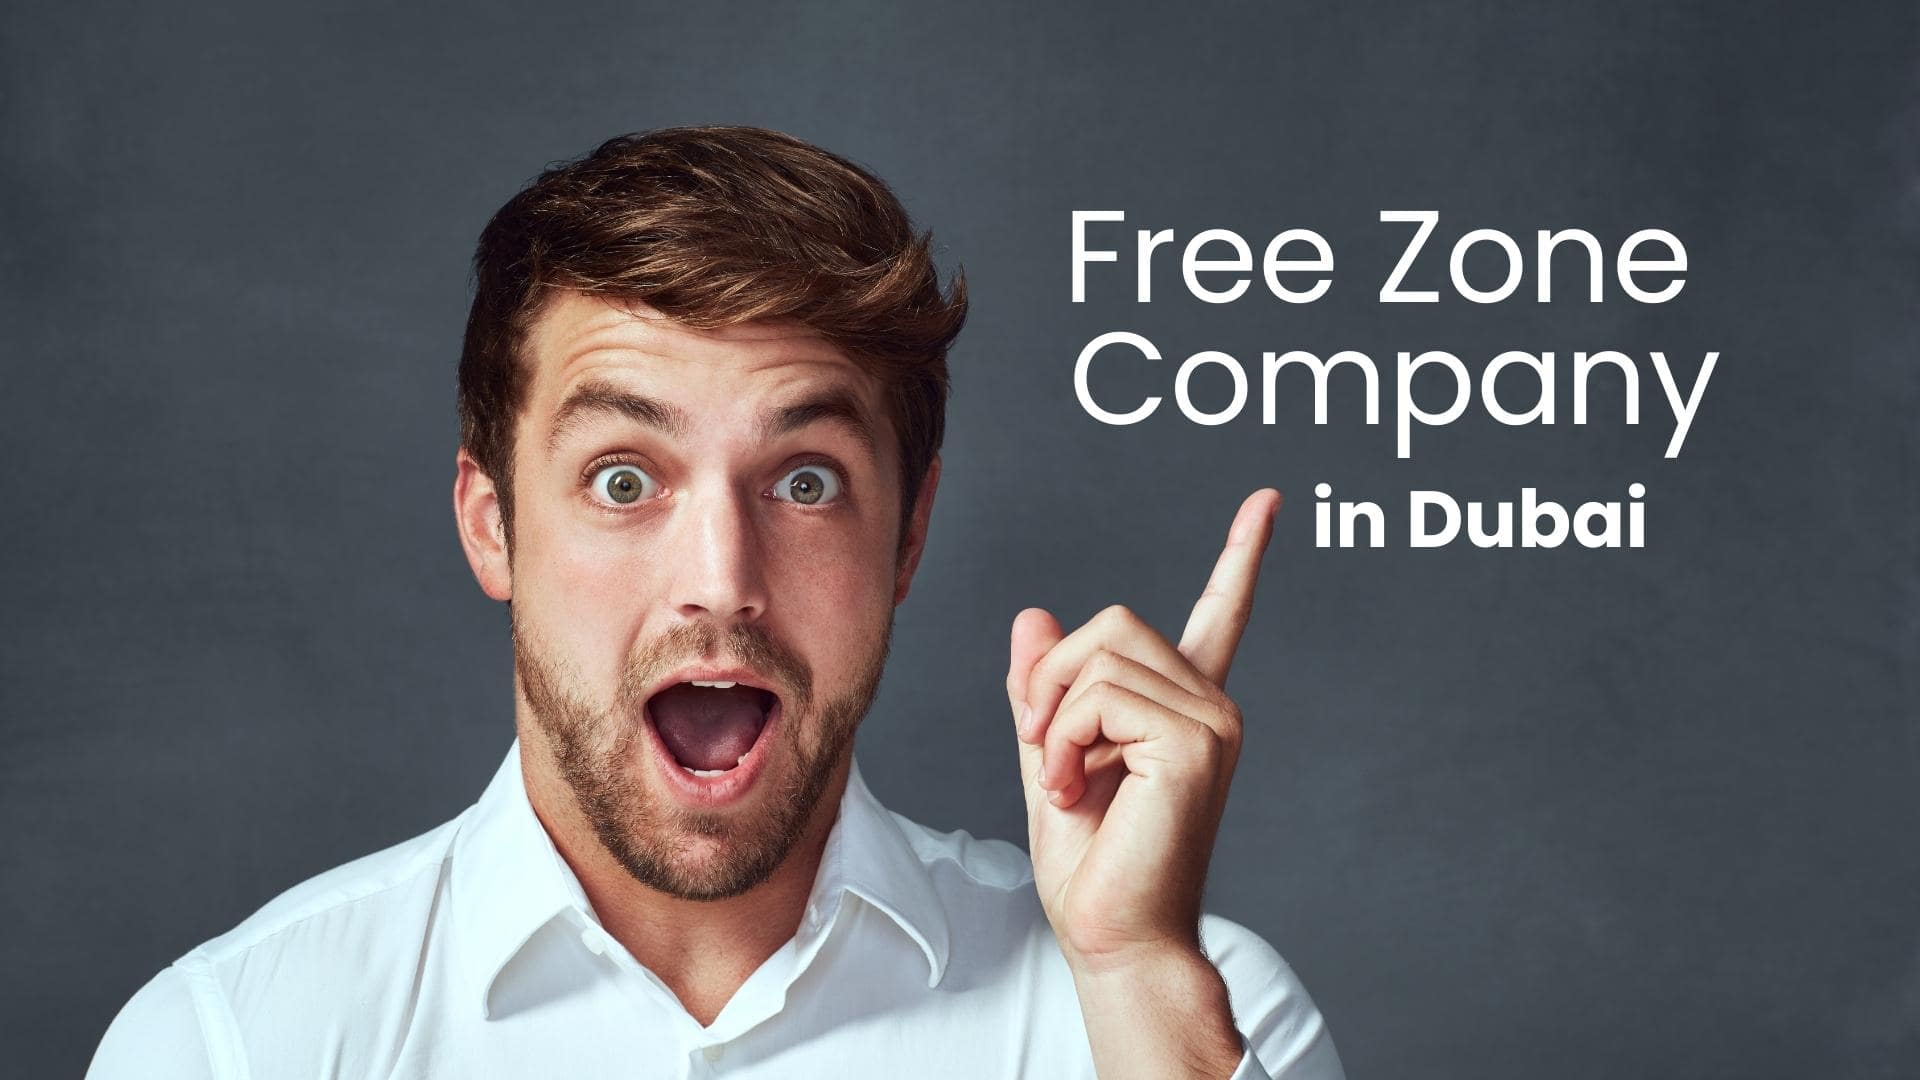 what does free zone company mean in dubai